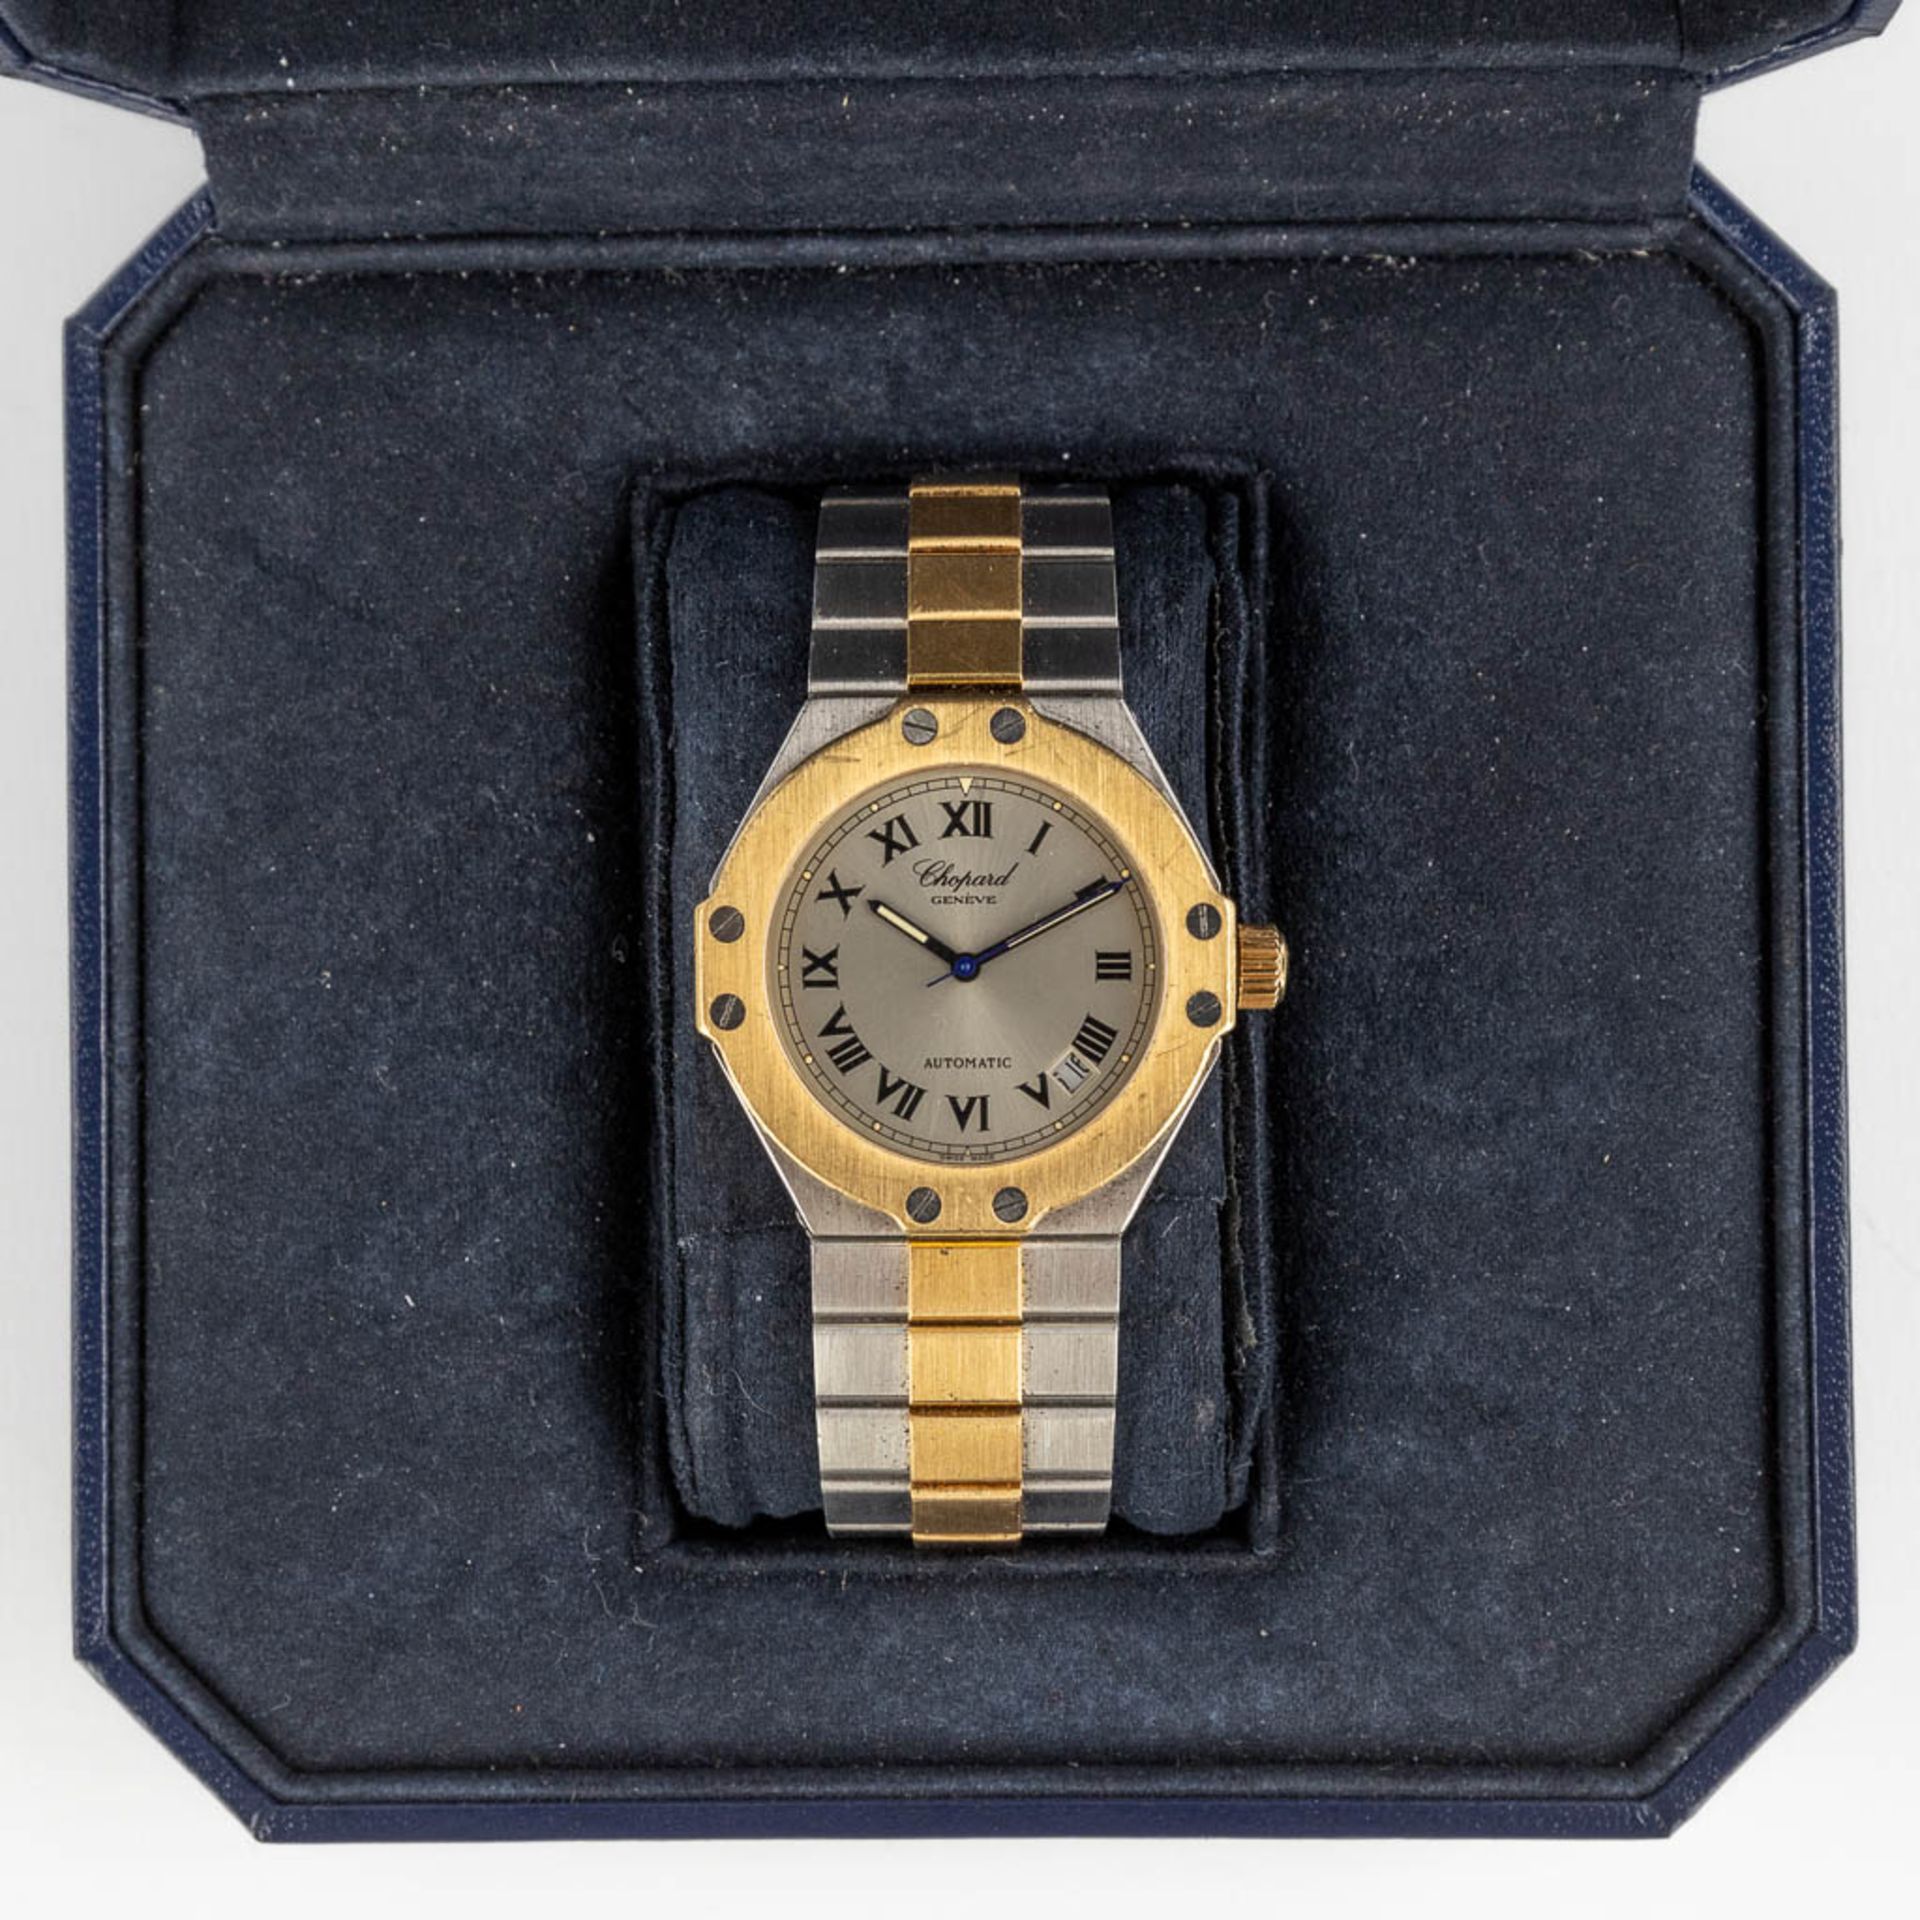 Chopard Saint Moritz, a men's wristwatch, 18kt yellow gold and steel. Box and papers. Reference 8300 - Image 4 of 16